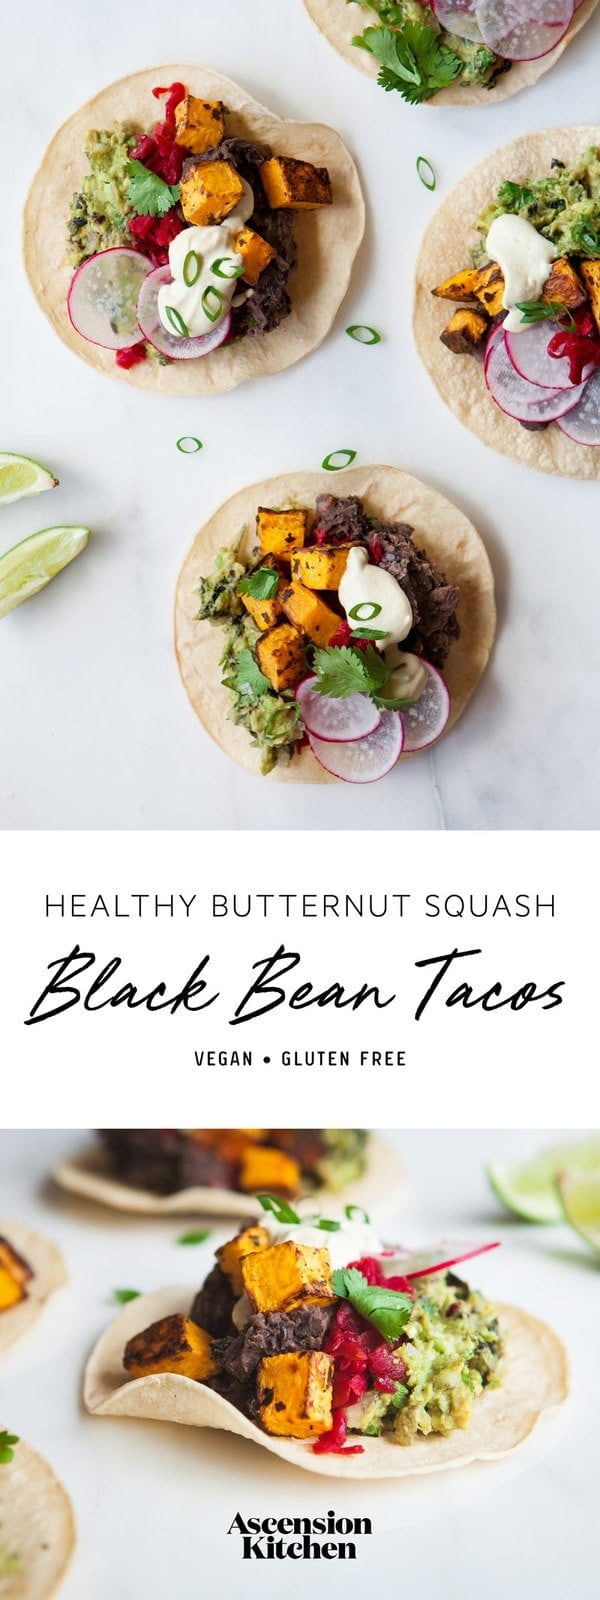 Healthy Butternut Squash Tacos with Refried Black Beans and a generous side of guacamole, of course! #butternutsquashtacos #butternutsquashtacosvegan #butternutsquashtacosblackbeans #butternutsquashtacoshealthy #butternutsquashtacosglutenfree #butternutsquashtacosrecipes #butternutsquashtacosdinners #vegantacos #vegantacosrecipe #AscensionKitchen // Pin to your own inspiration board! //